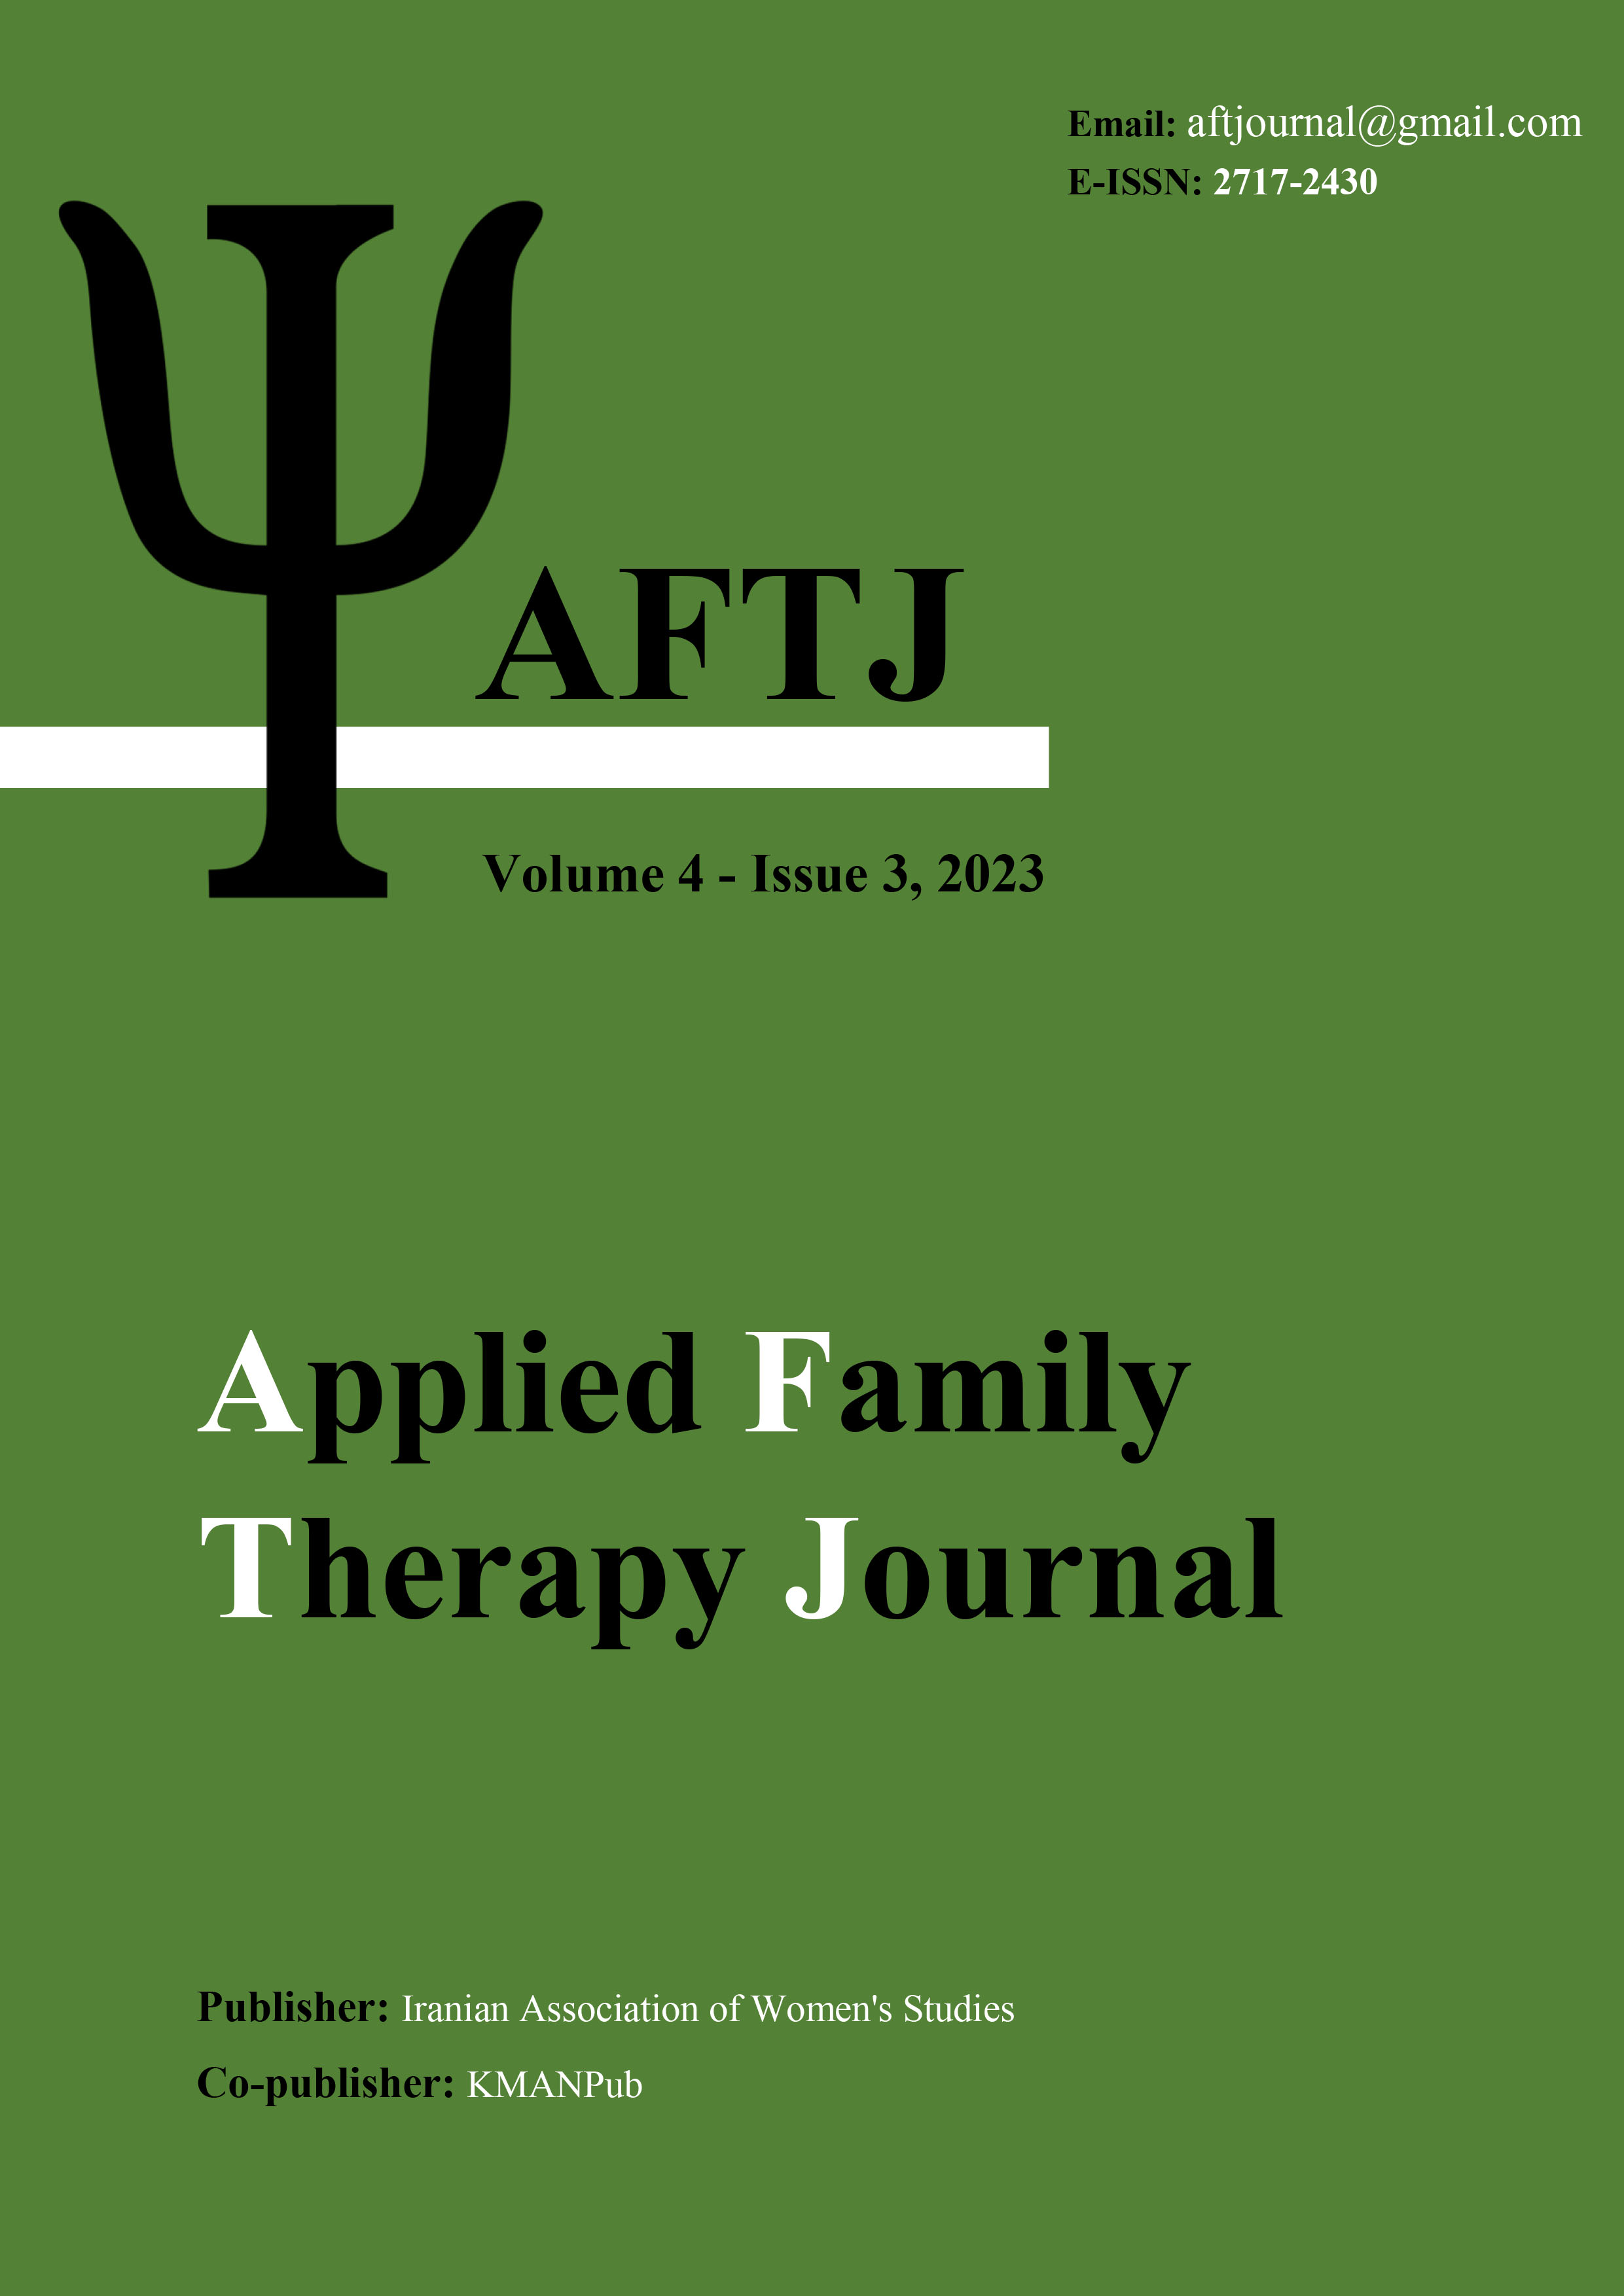 Journal of Applied Family Therapy